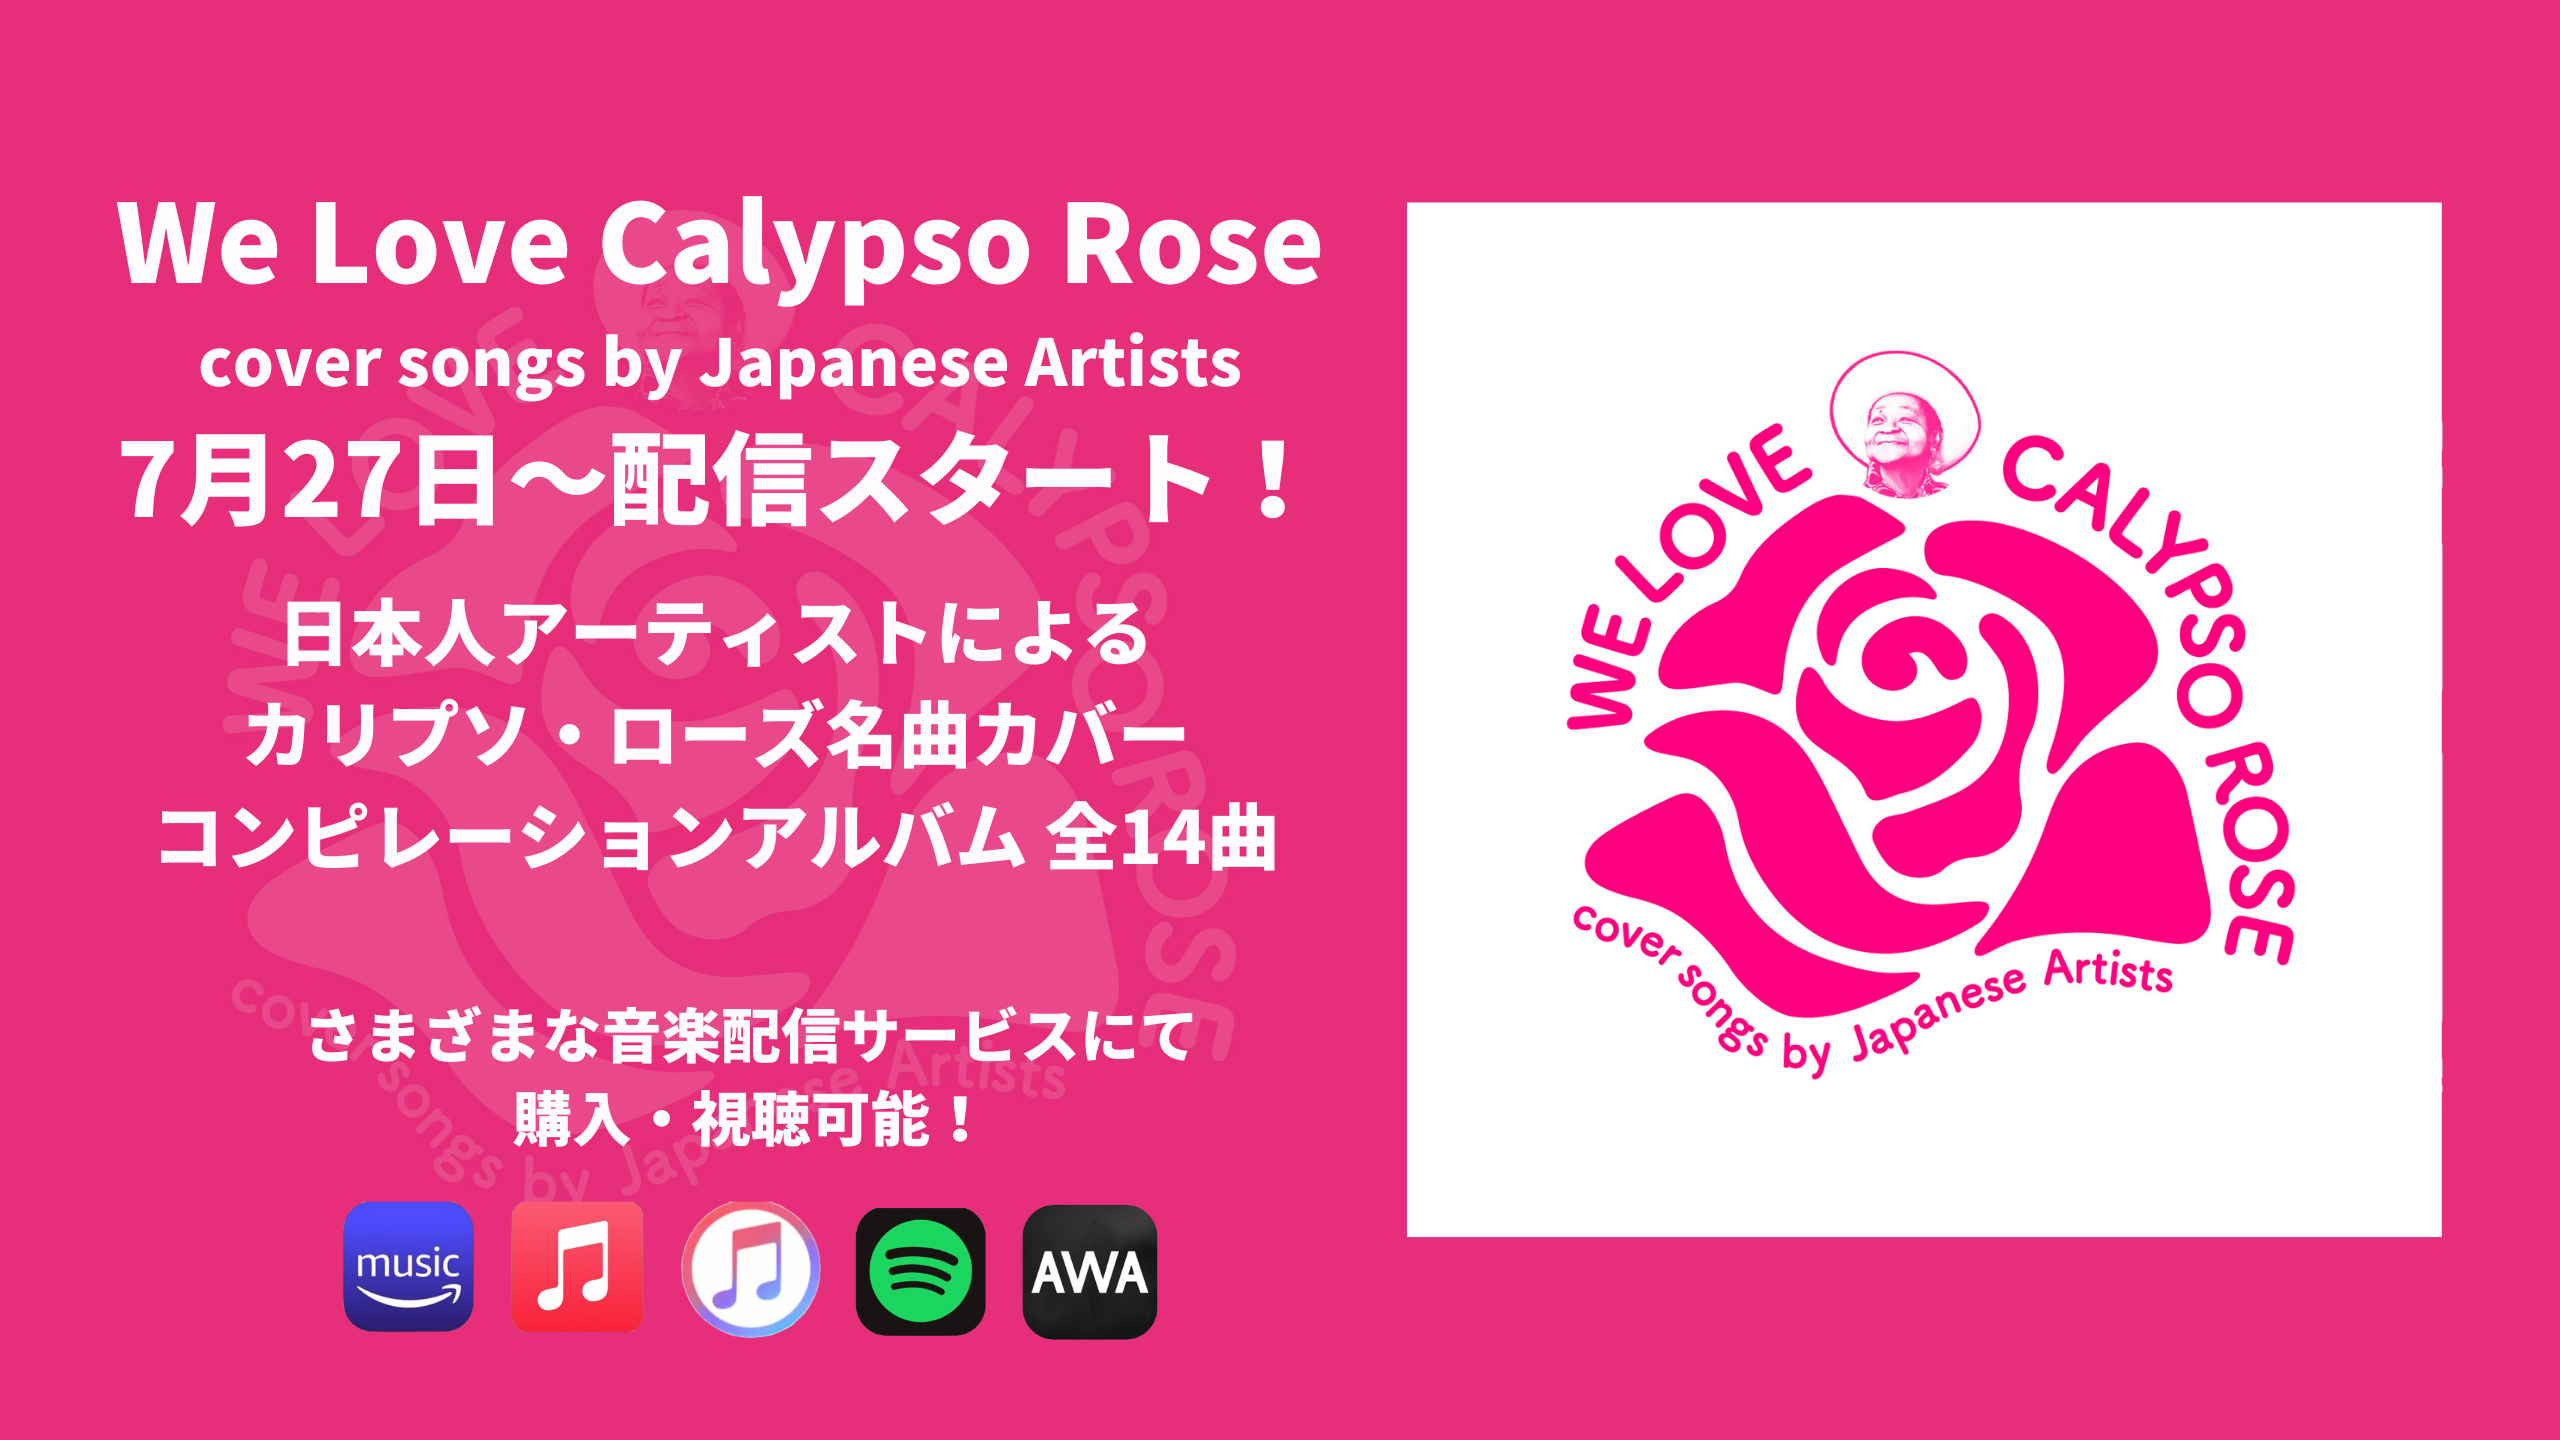 WE LOVE CALYPSO ROSE cover songs by Japanese Artists